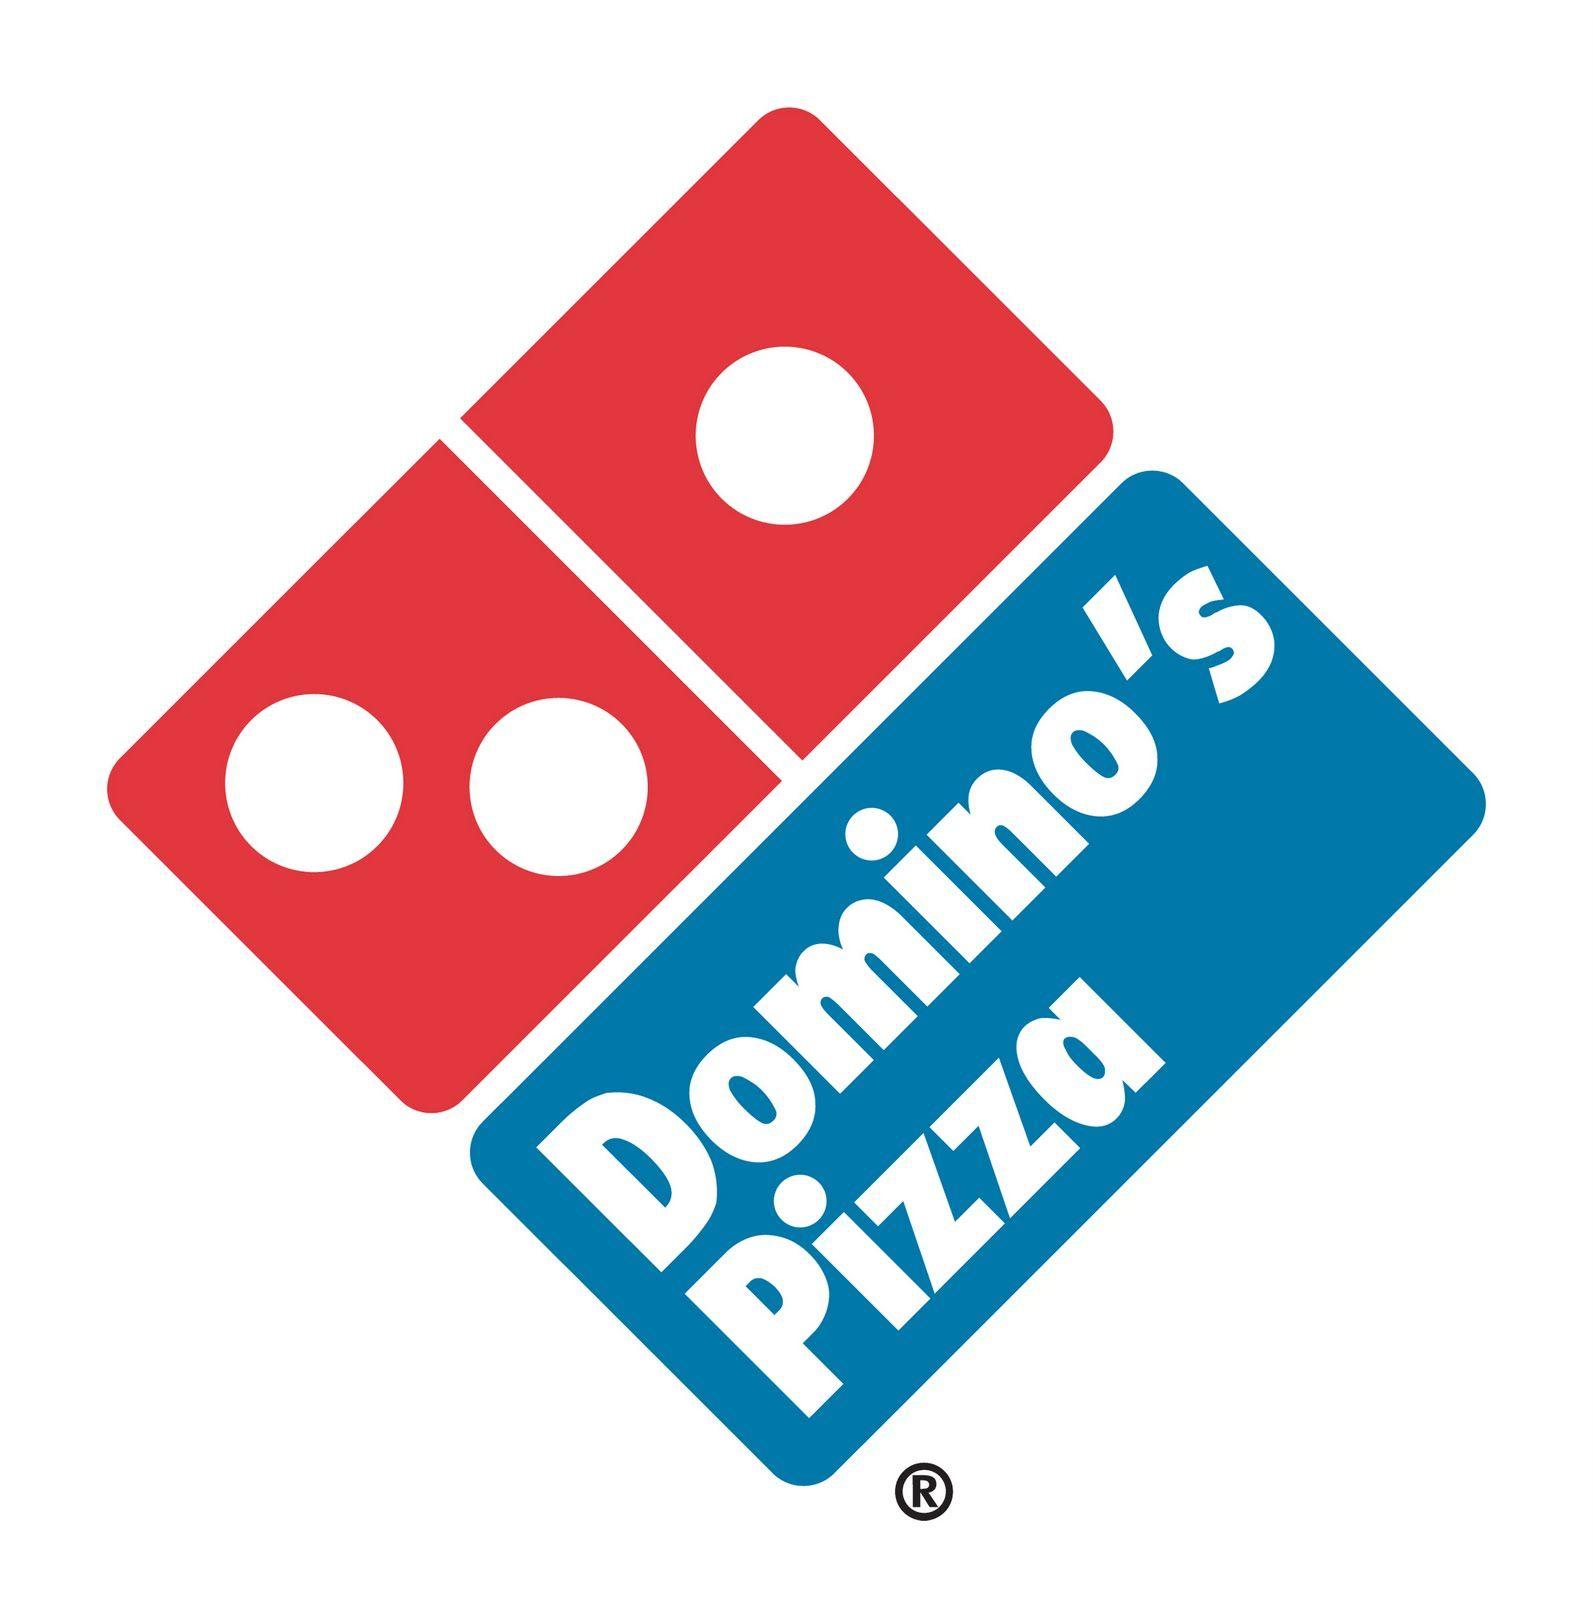 Popular Food Chains Logo - popular logos - Google Search | Iconic Logos | Pizza, Dominos pizza ...